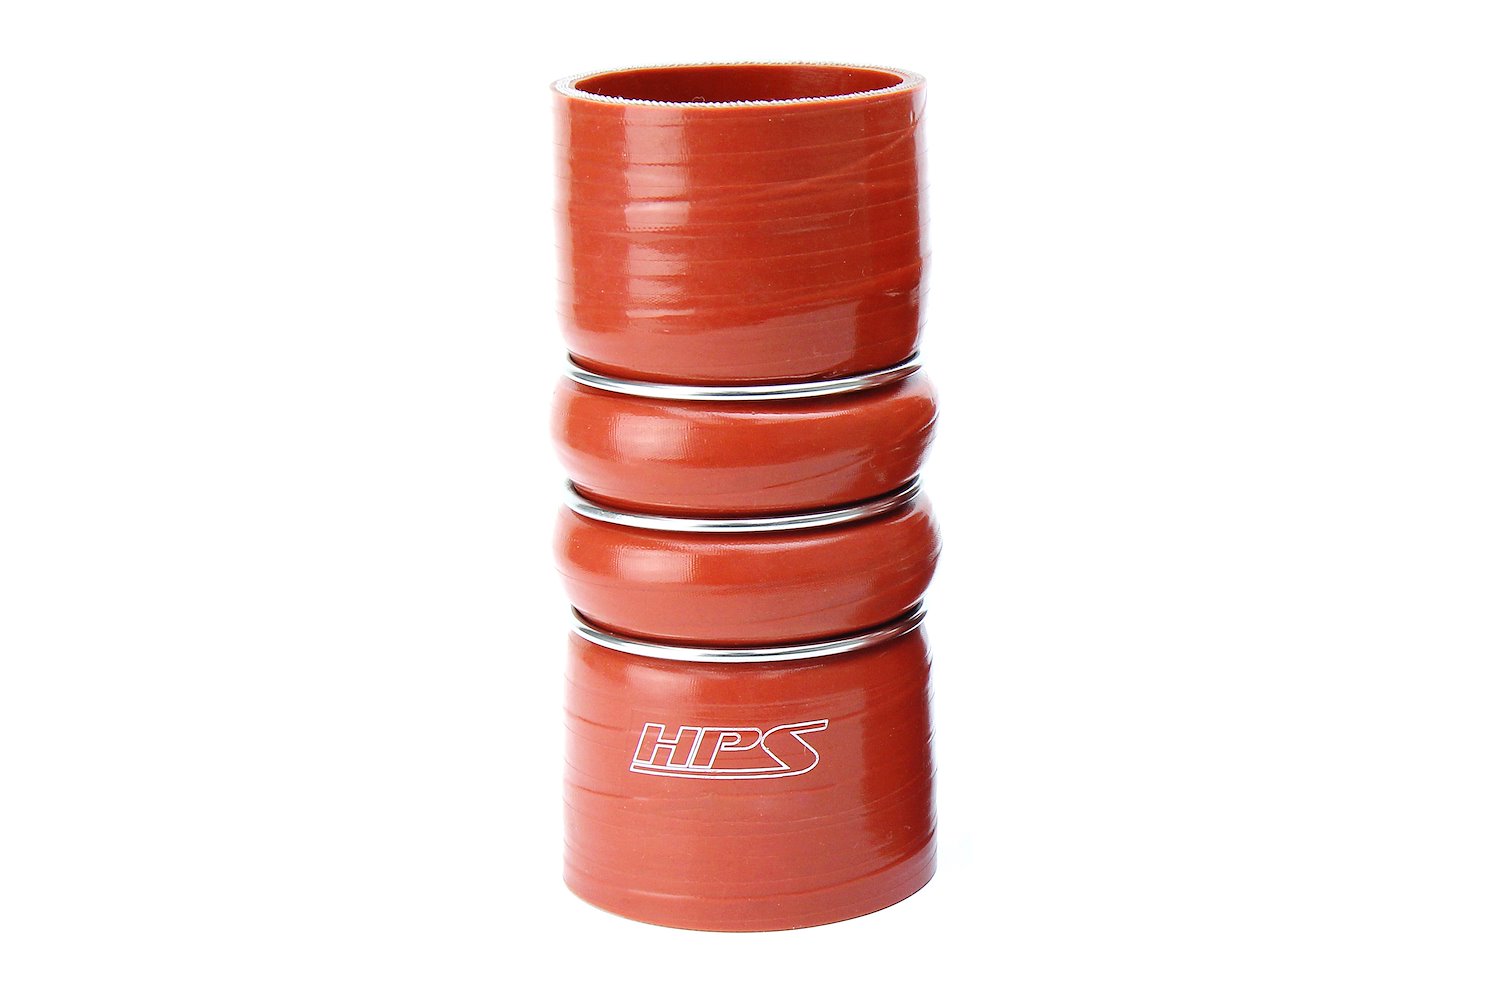 CAC-300-L7-HOT Silicone CAC Hose, Silicone CAC Hump Hose Hot, High-Temp 4-Ply Aramid Reinforced, 3 in. ID, 7 in. Long